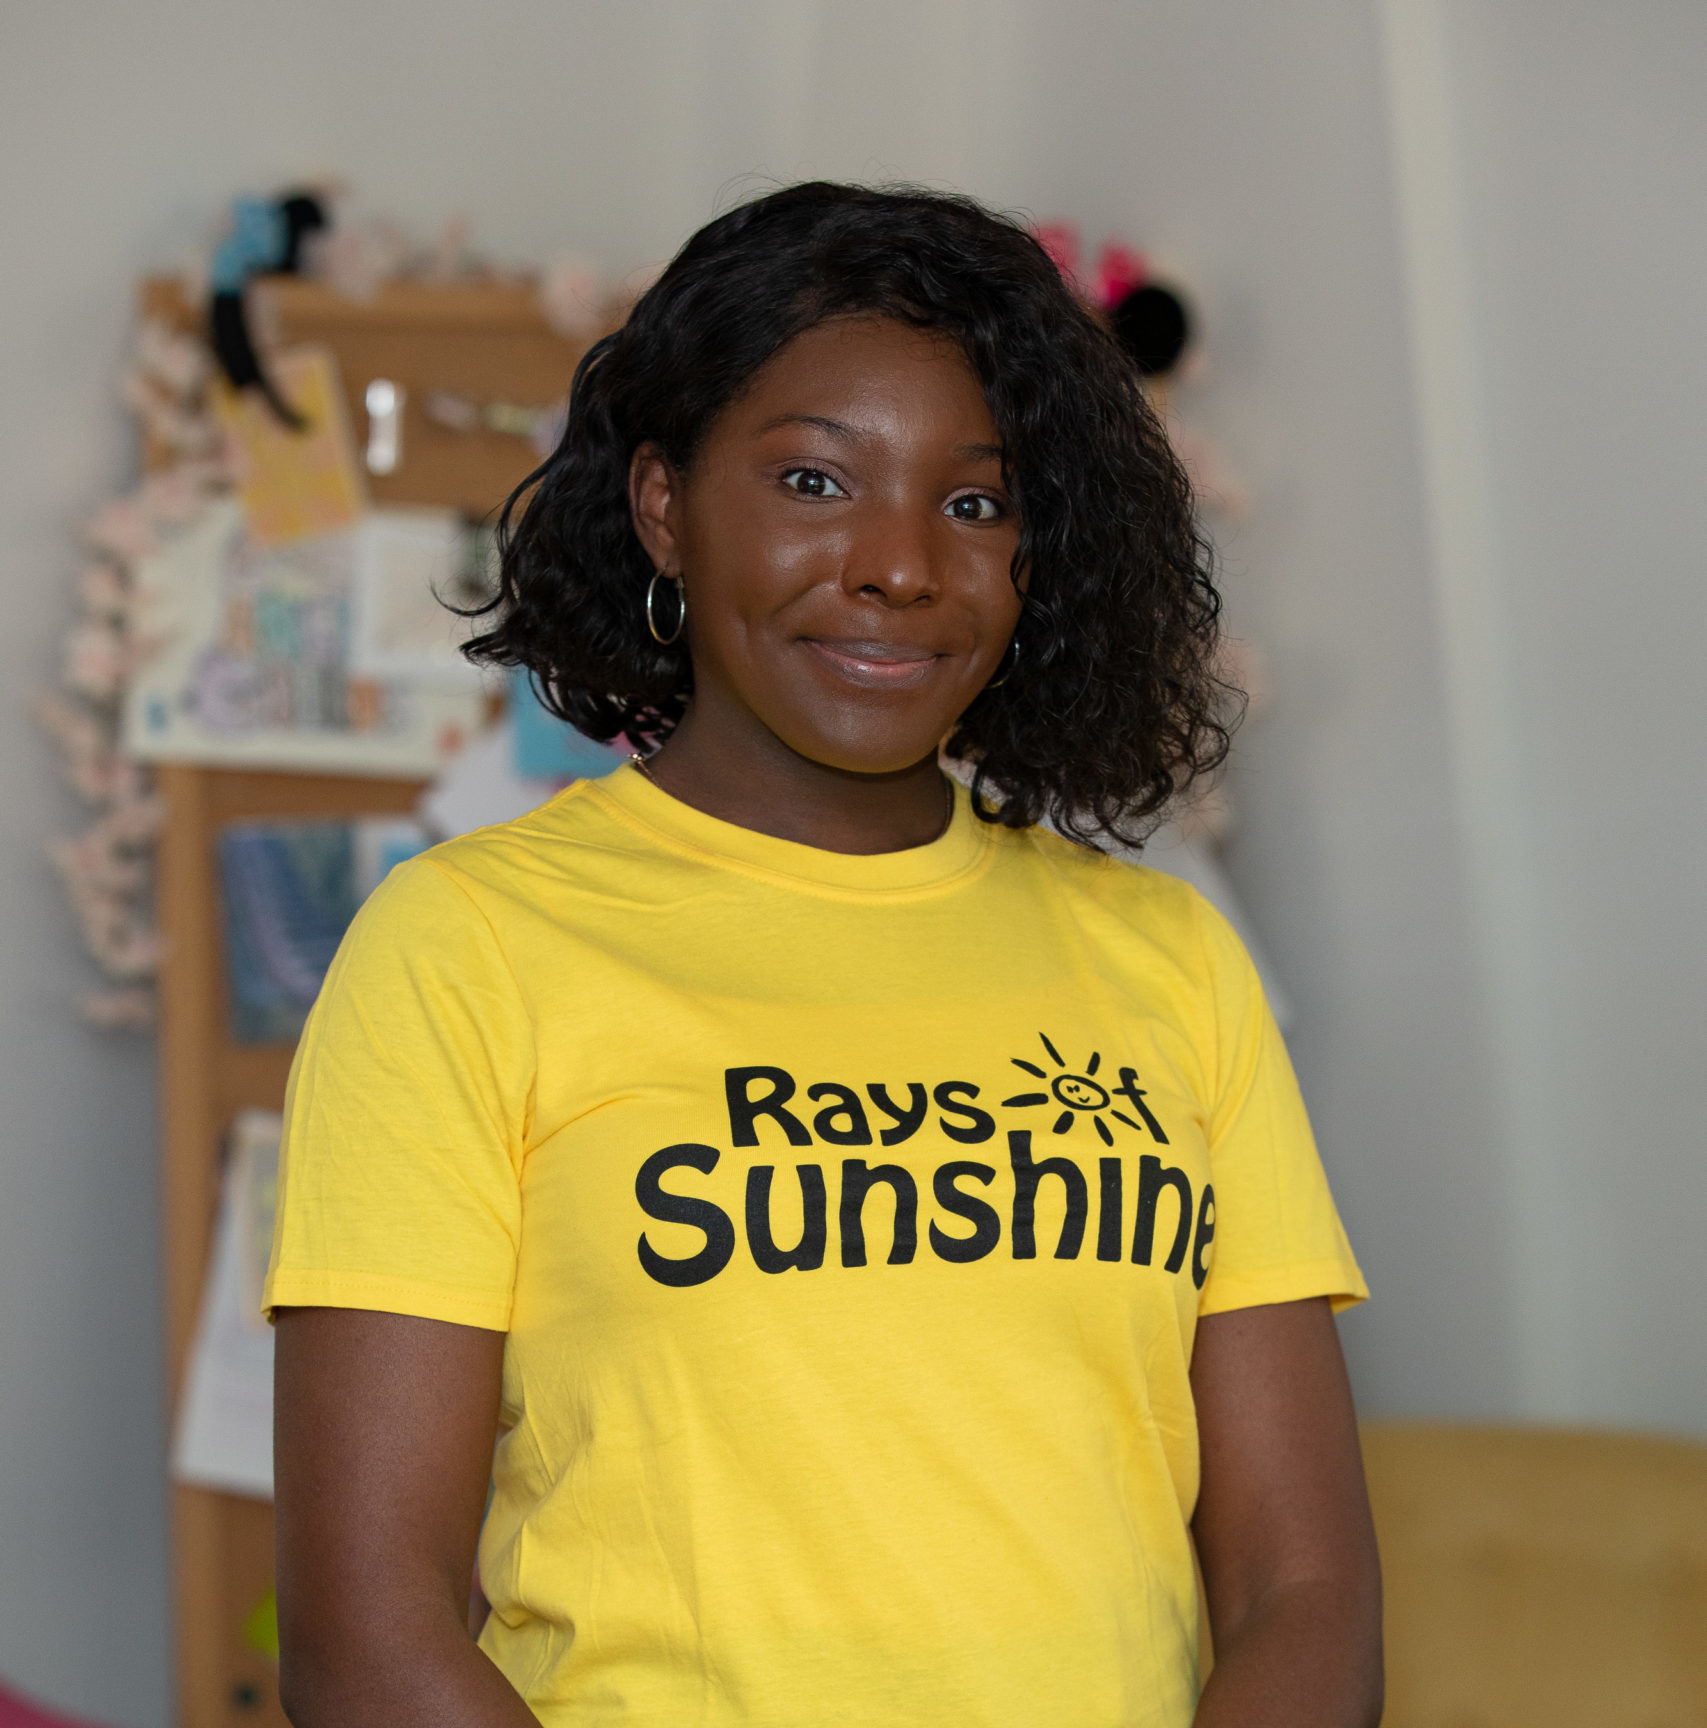 Jess is wearing a yellow Rays of Sunshine t-shirt. She is standing and has dark hair.